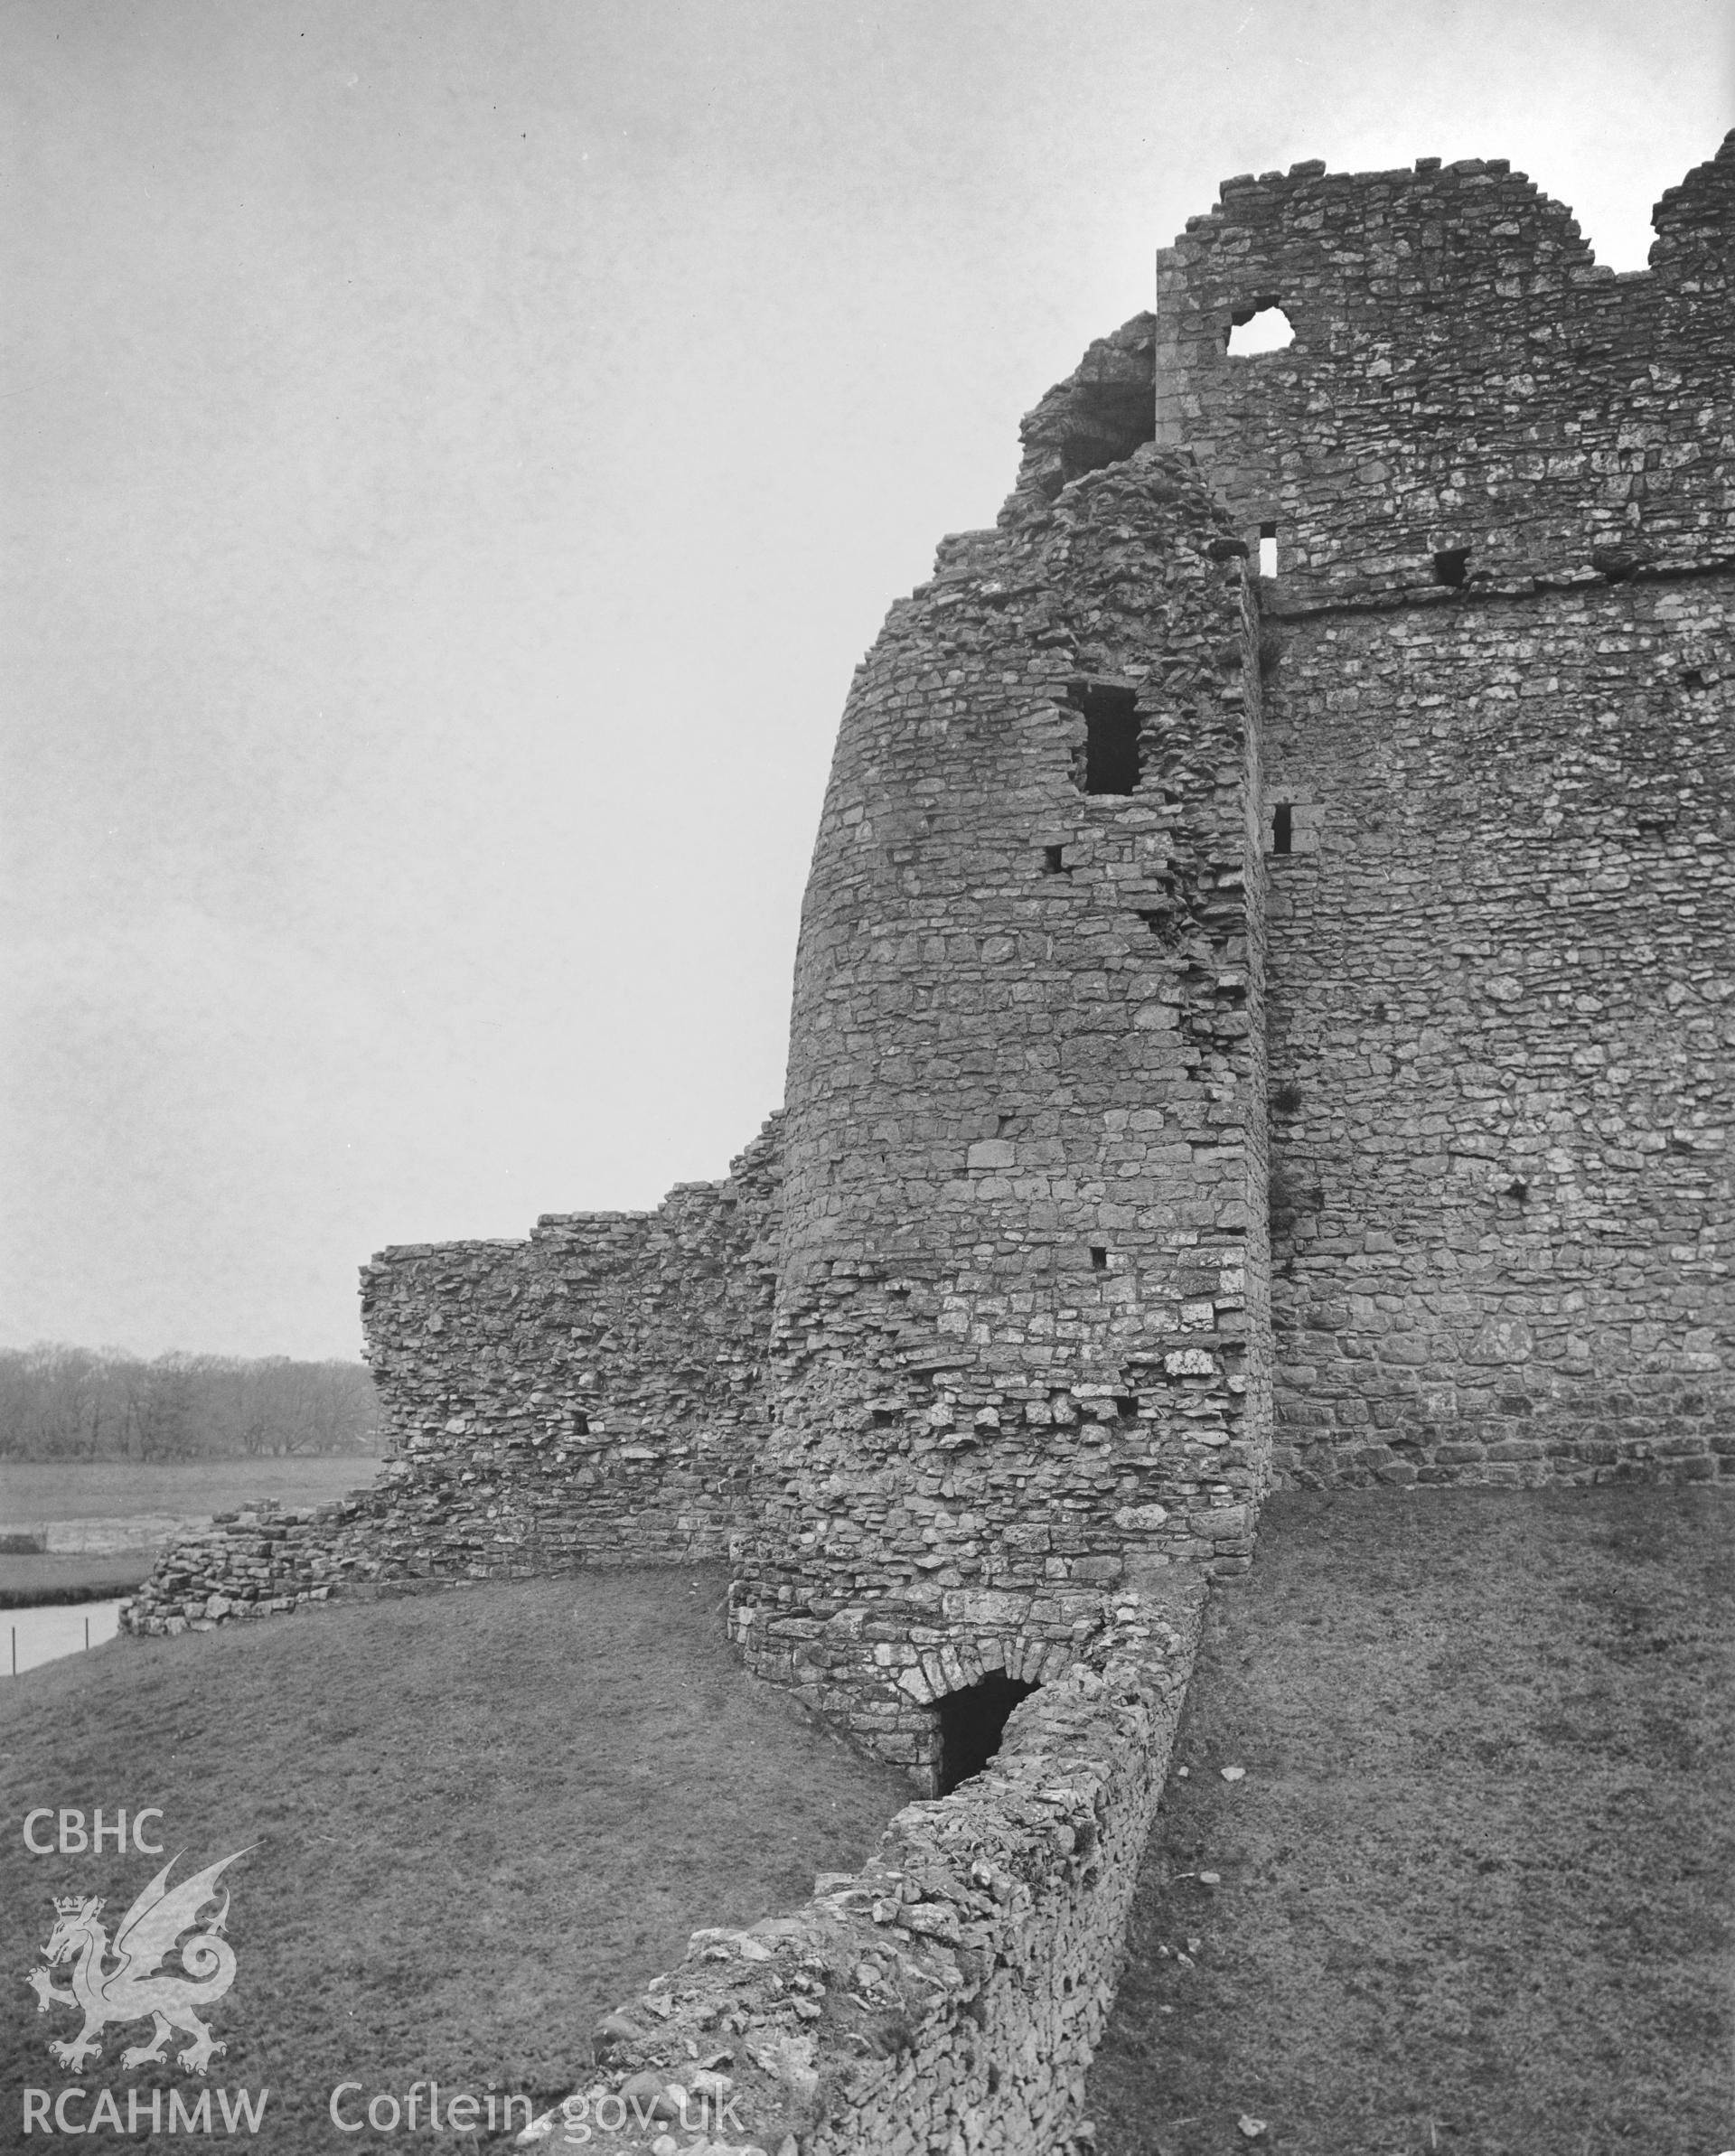 The stair to the curtain wall at Ogmore Castle.